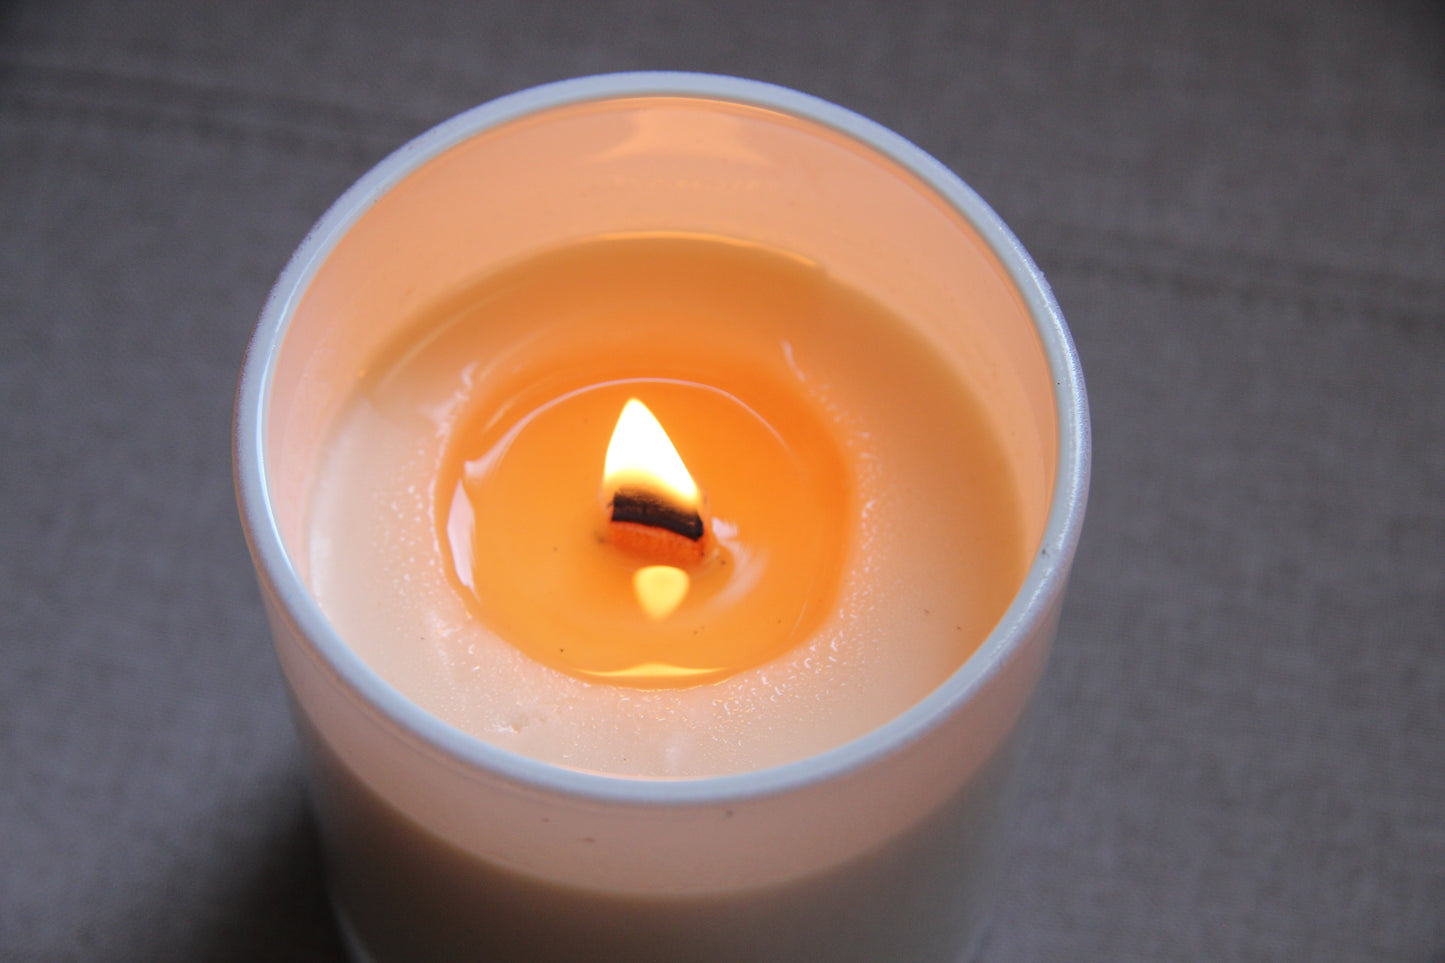 Crispy Little Marshmallow Refillable Wood Wick Candle